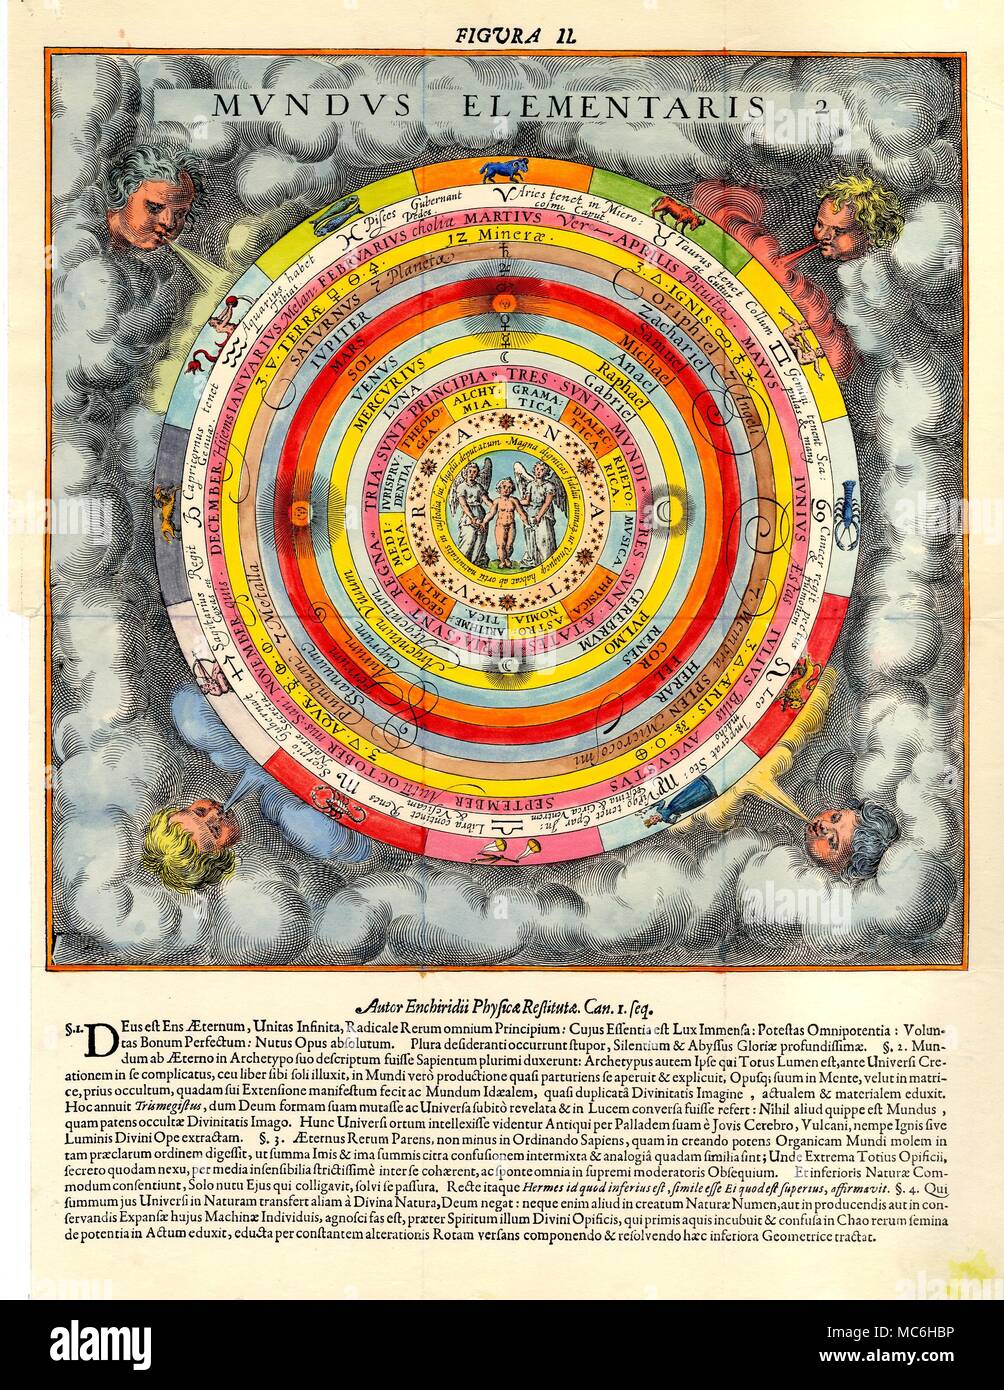 ASTROLOGY - NOSTRADAMUS The schema of the cosmos [Mundus Elementaris] according to the late mediaeval cosmology: an engraving from Johann Daniel Mylius, Opus Medico-Chymicum, 1618, used also in Janitor Pansophus, Seu Figura Aenea Quadripartita. According to this cosmology, the universe was a living thing, a ladder of spiritual being. The alchemical system portrayed in this complex diagram departs to some extent from the Theological system, and even from the standard Ptolemaic. The outer sphere consists of the zodiac, with its twelve images for the signs. In the conterminous sphere, are Stock Photo